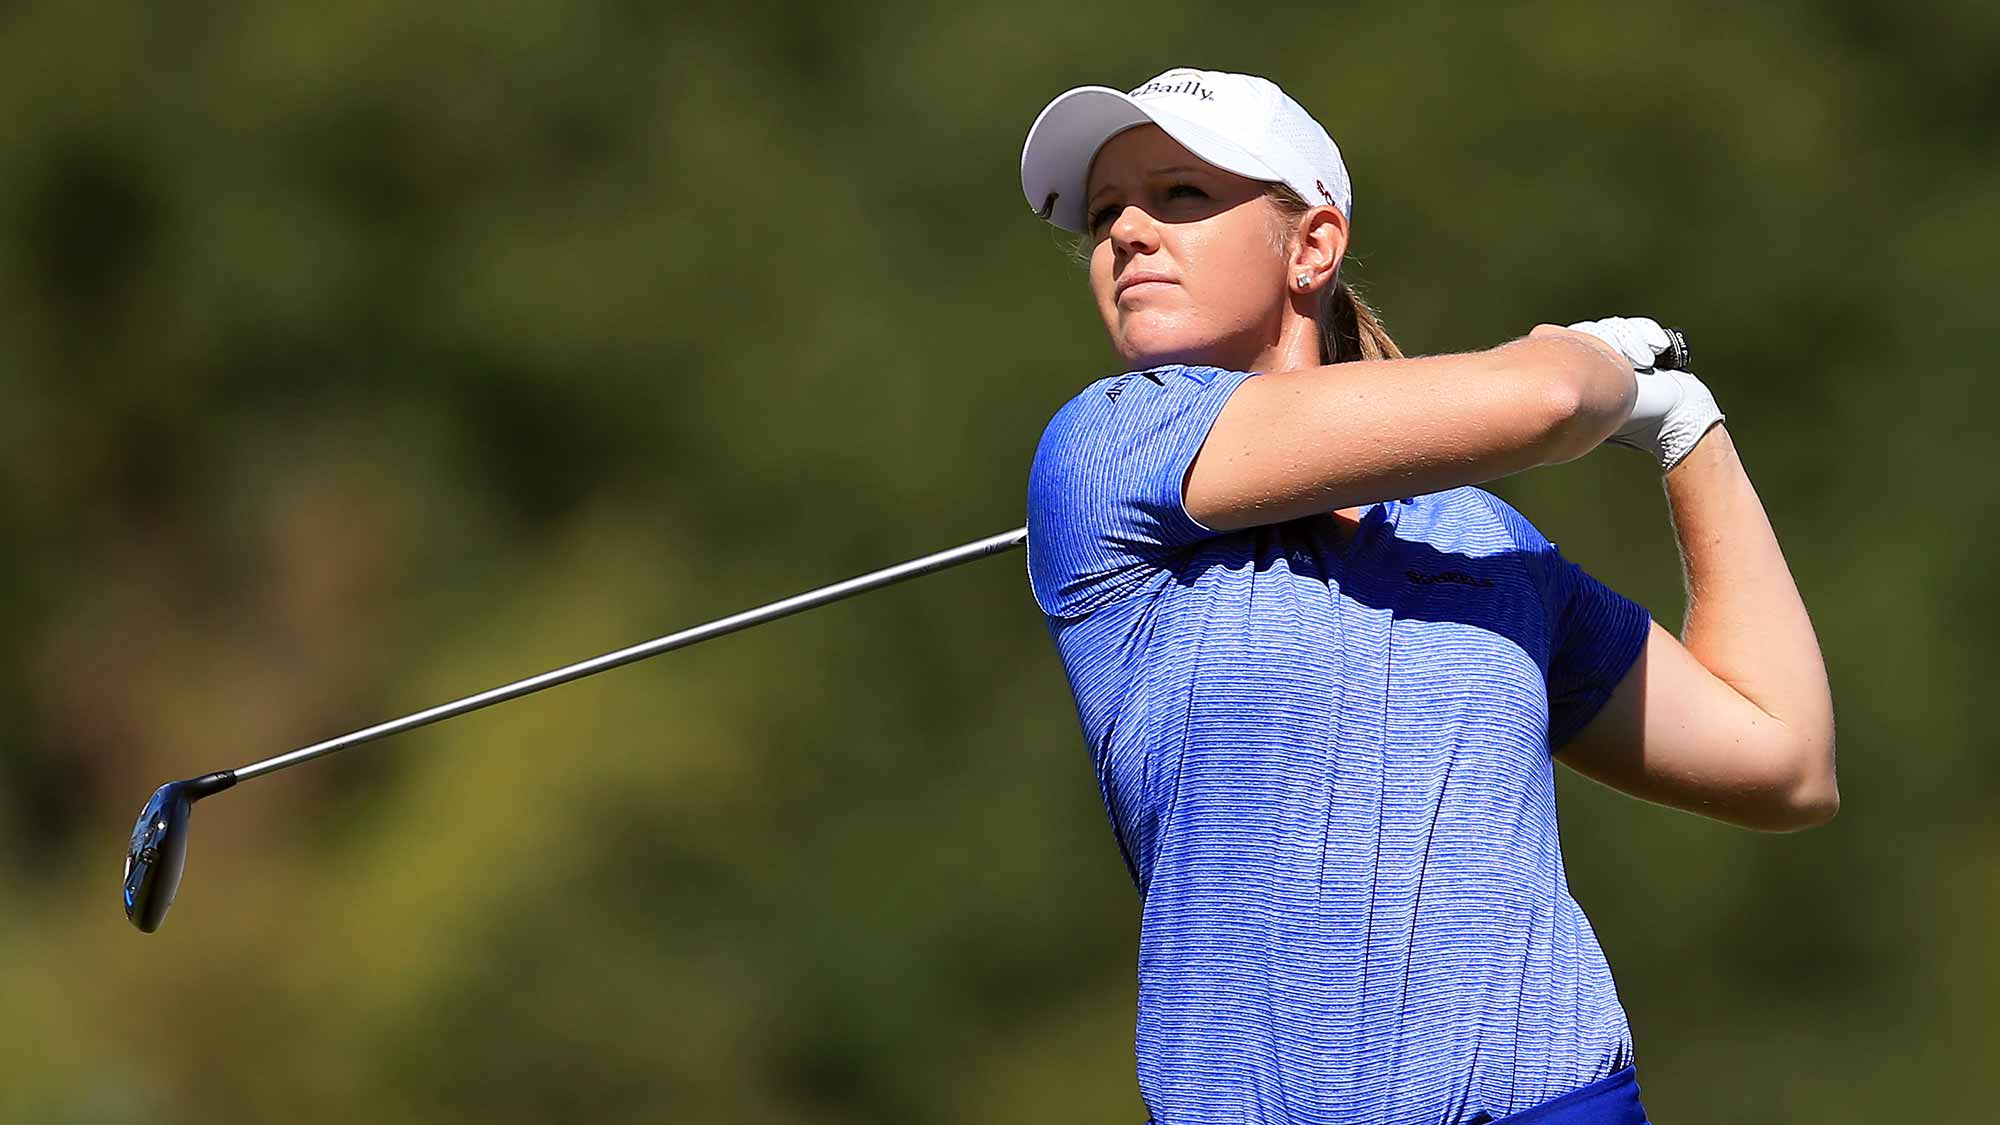 amy-anderson-returns-to-alma-mater-as-volunteer-assistant-coach-lpga